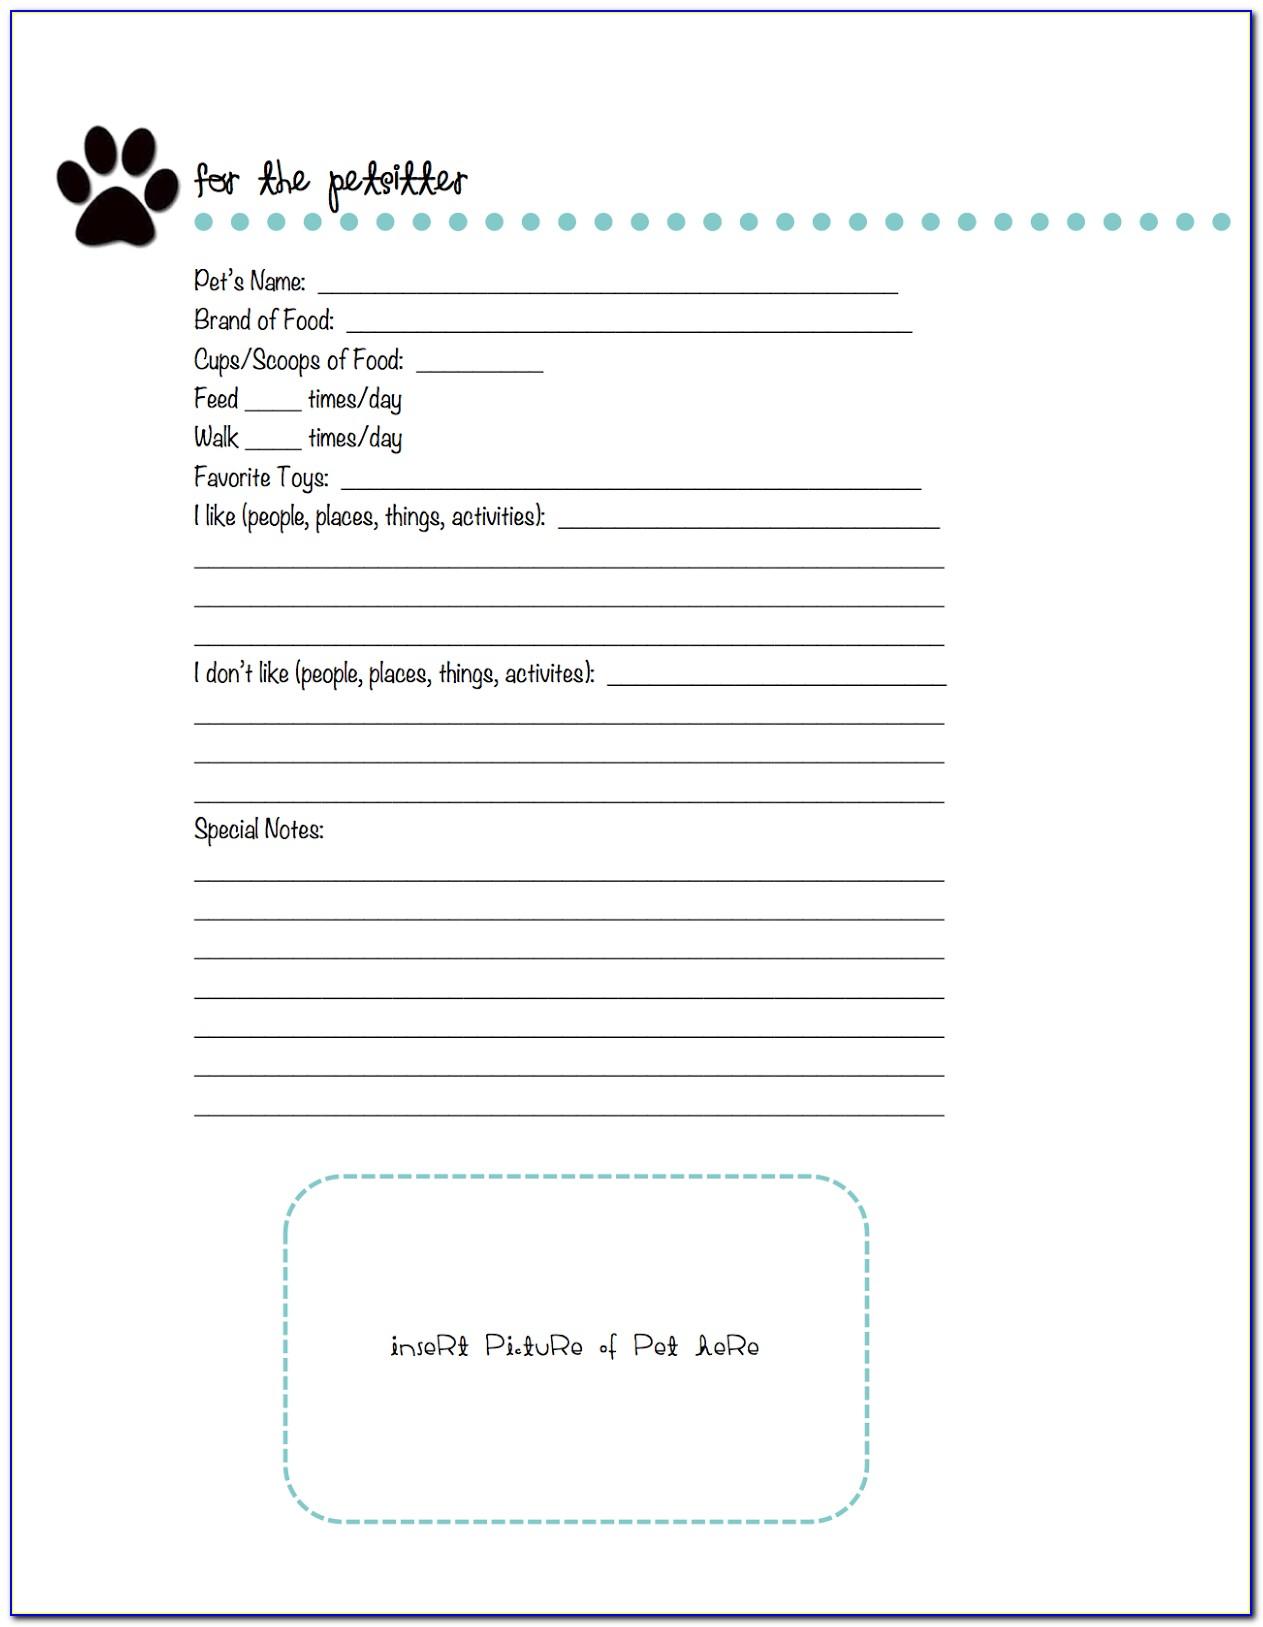 Pet Sitting Instructions Template Free